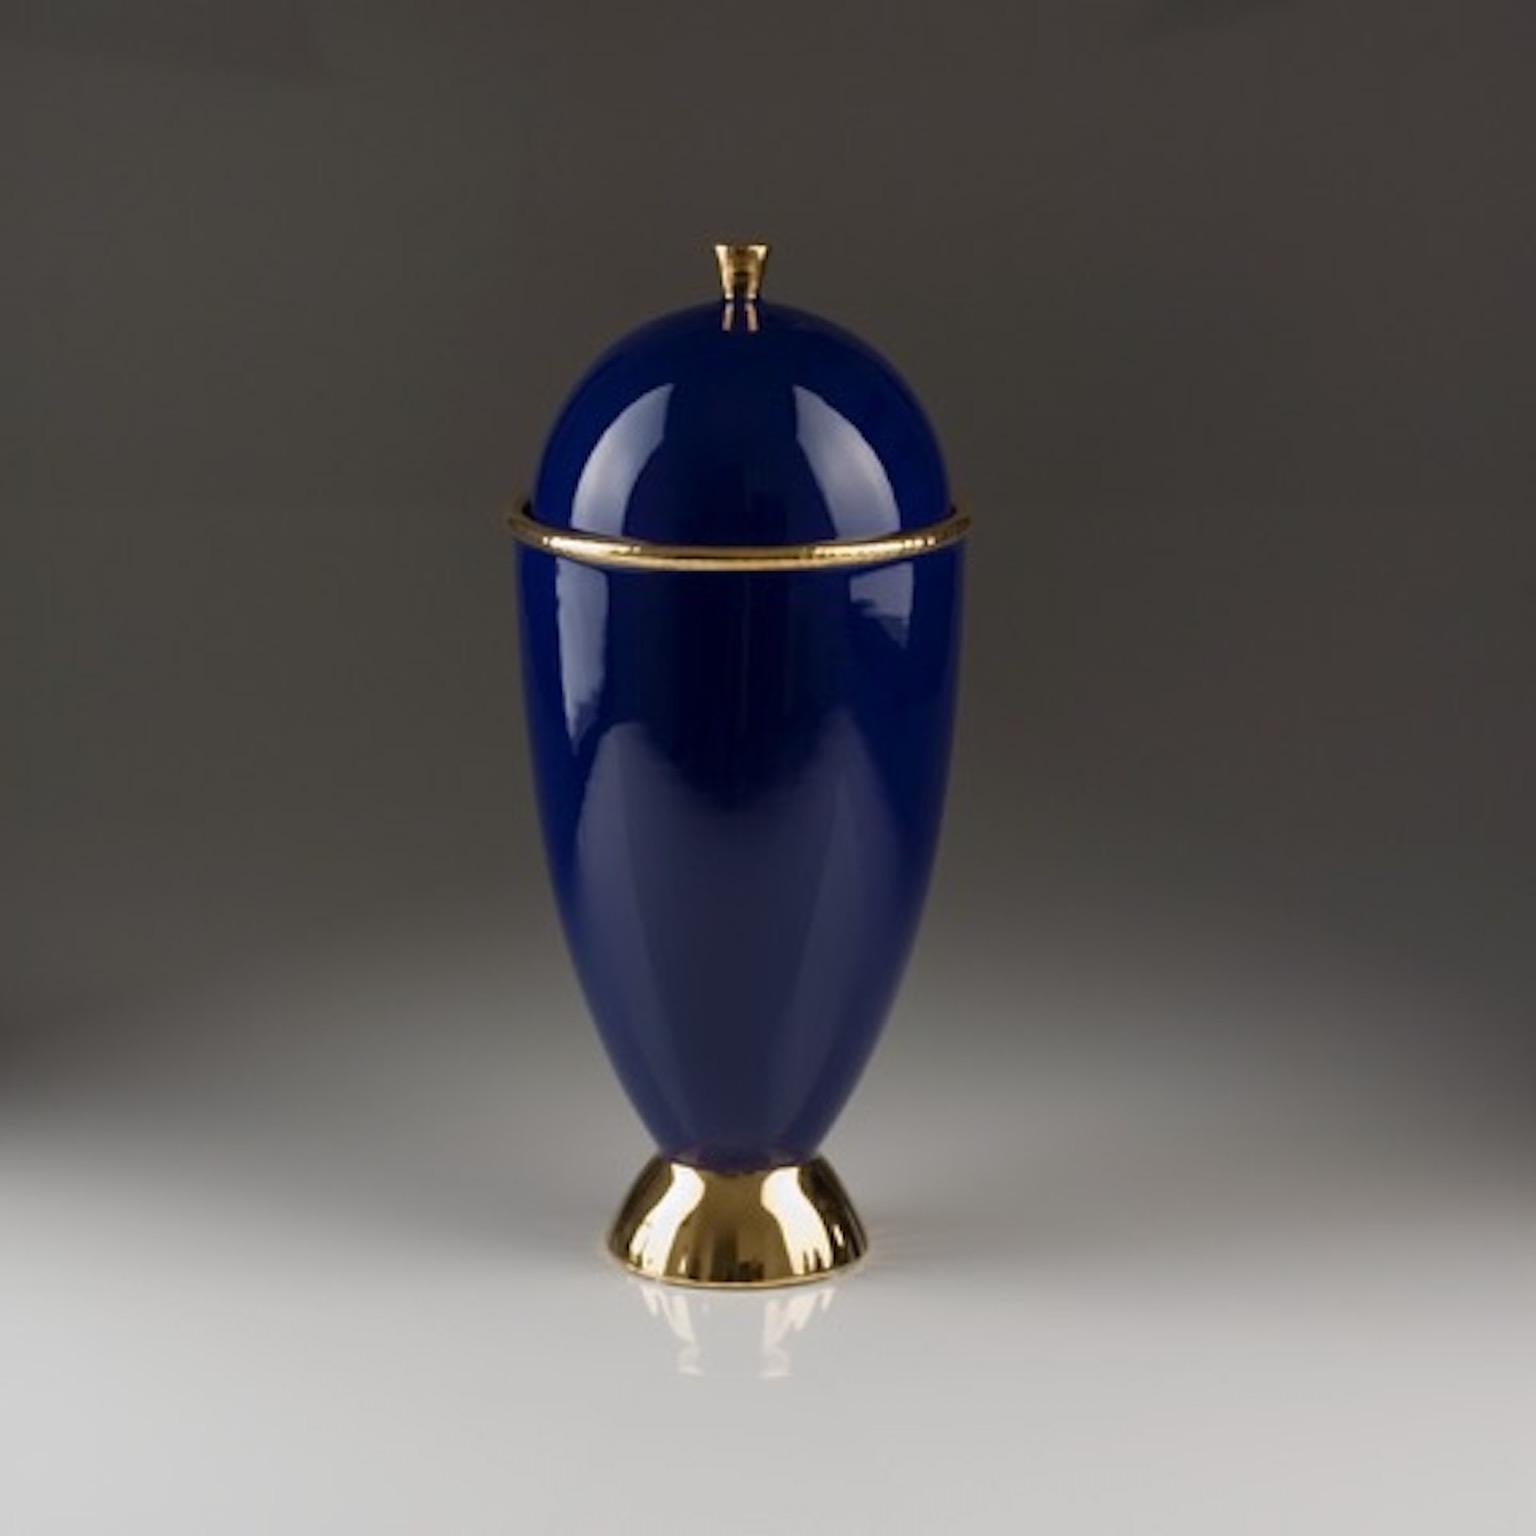 Italian Ceramic Vase 05 Model 900 Collection by Ugo La Pietra for Superego Editions. For Sale